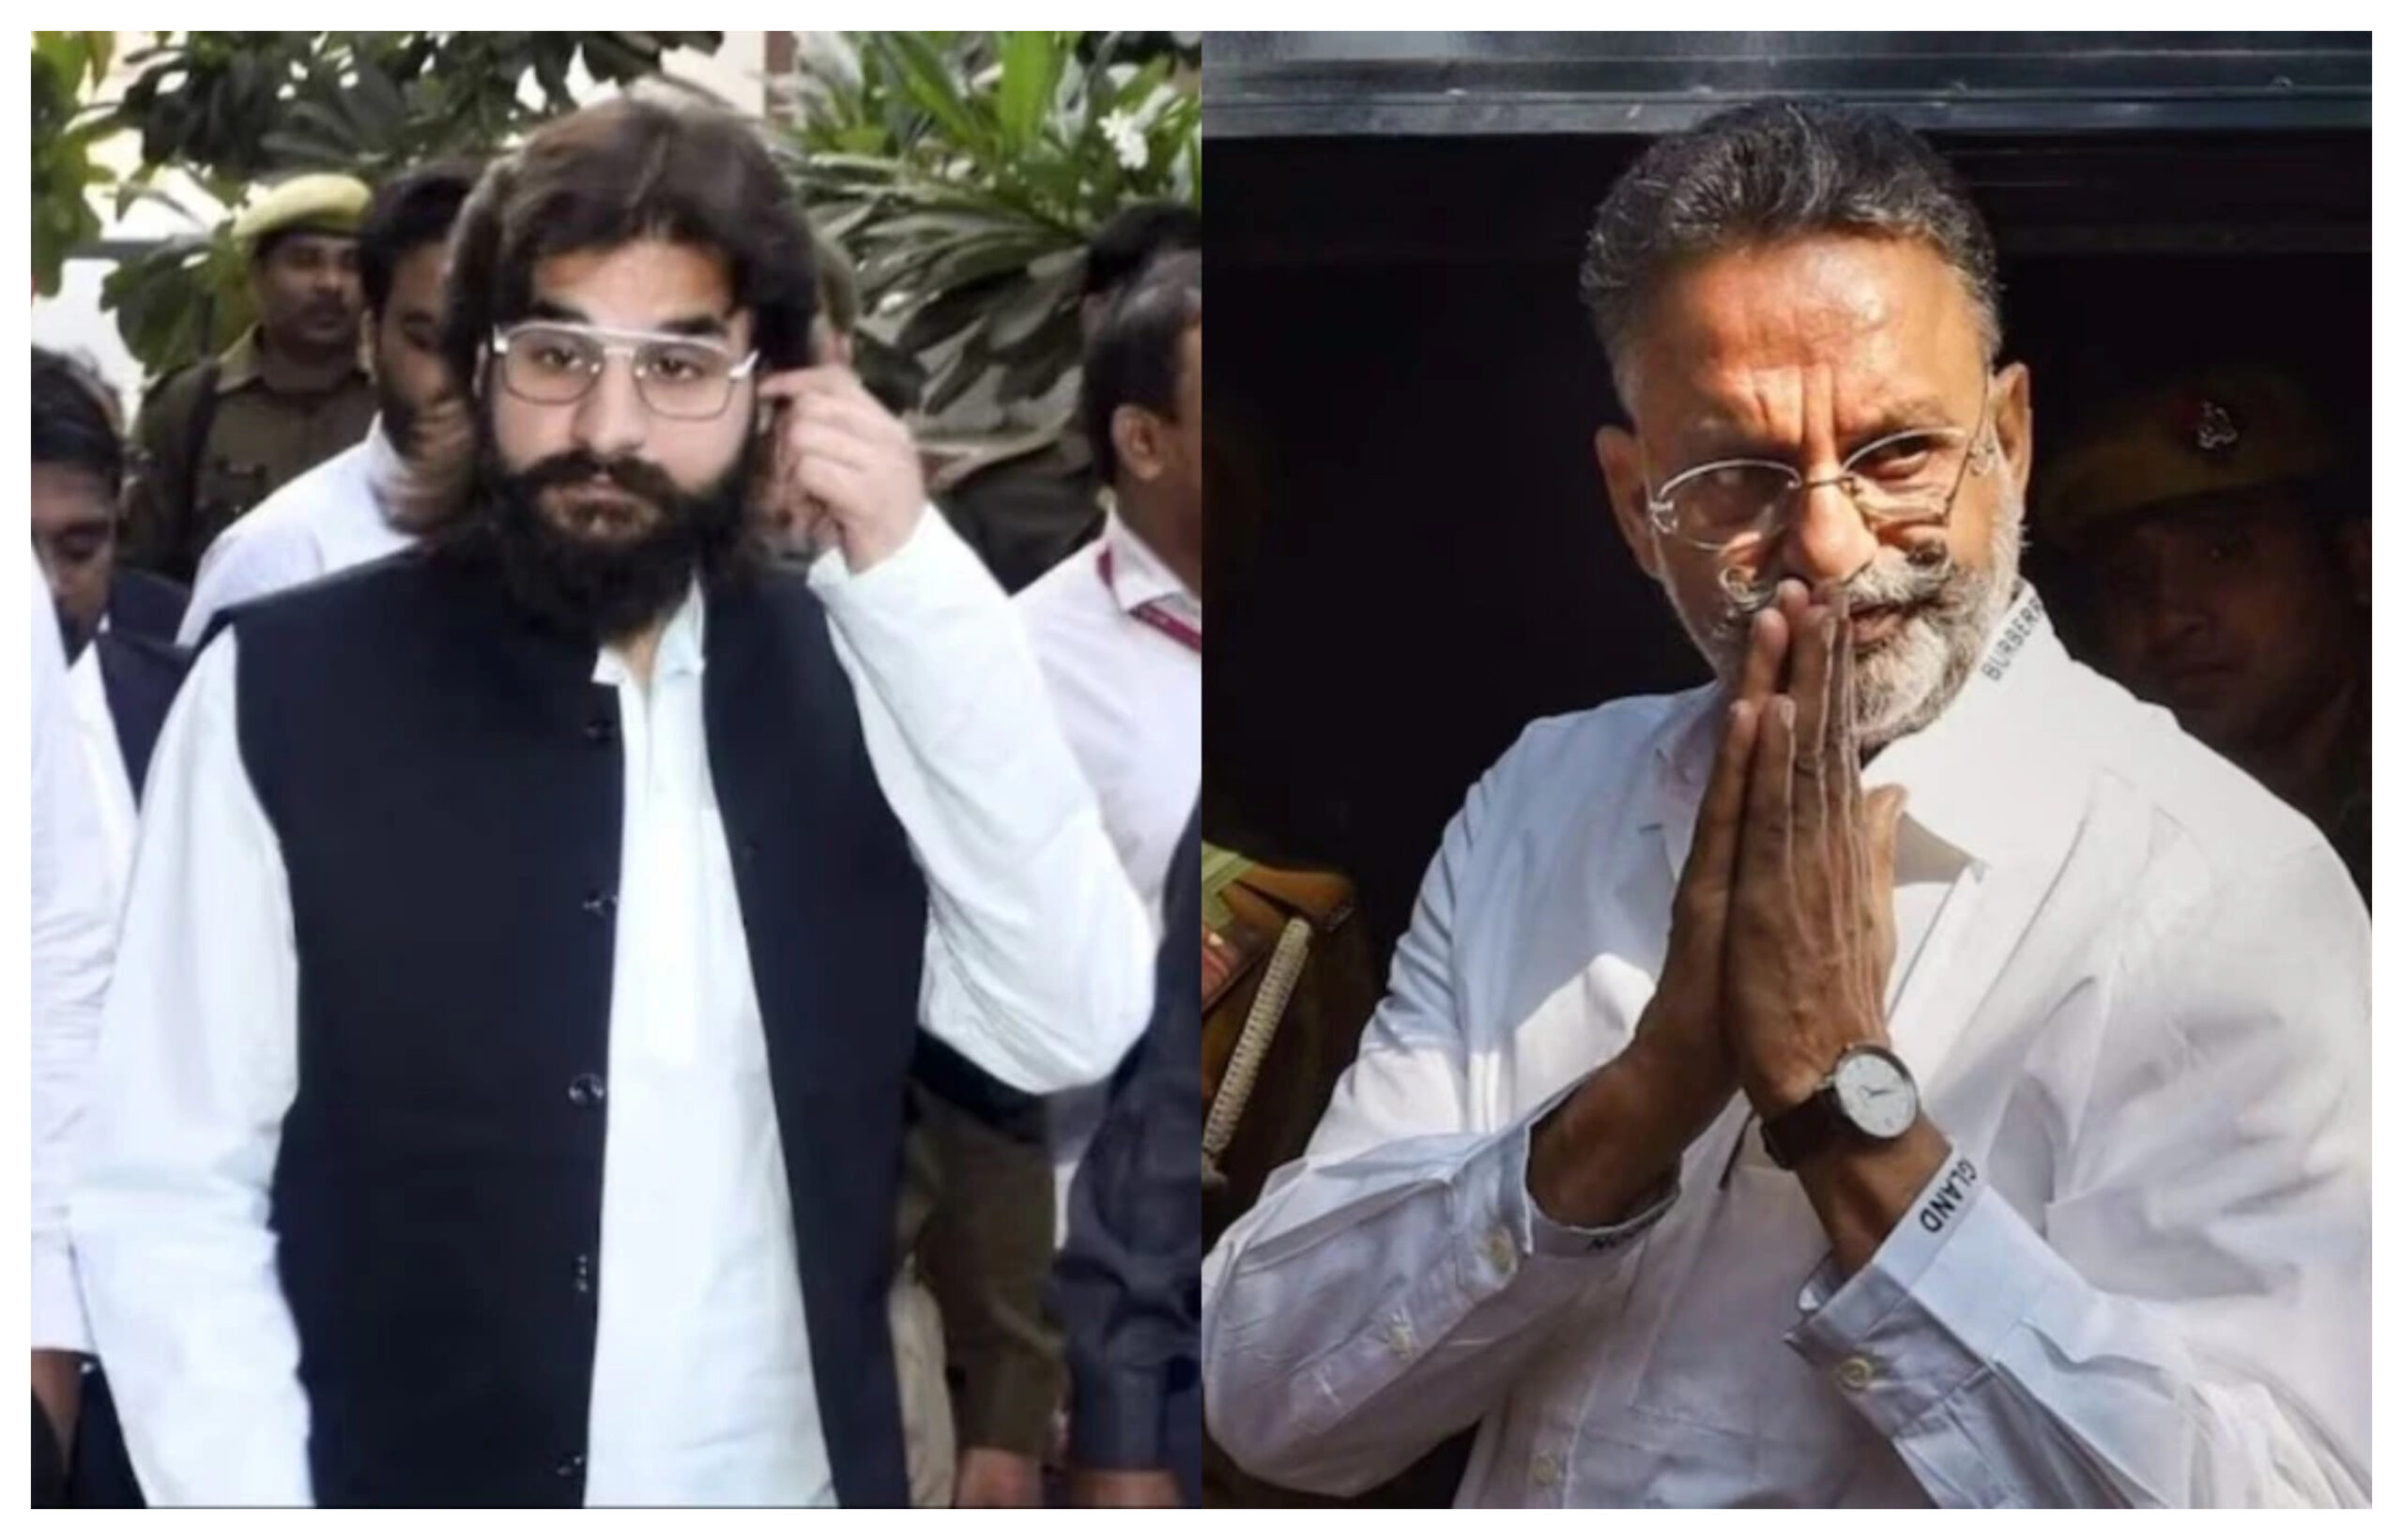 UP Crime: Abbas Ansari is haunted by the fear of death, says his father's murderers can give him poison, abbas-fear-of-being-poisoned-in-jail-court-orders-investigation-lclk, Abbas Ansari, Supreme Court, Mukhtar Ansari, Fatiha, MLA Abbas Ansari, Mukhtar Son Abbas Ansari, Ghazipur, Mukhtar Ansari Fatiha Ceremony, Mafia Don Mukhtar Ansari, UP news in hindi